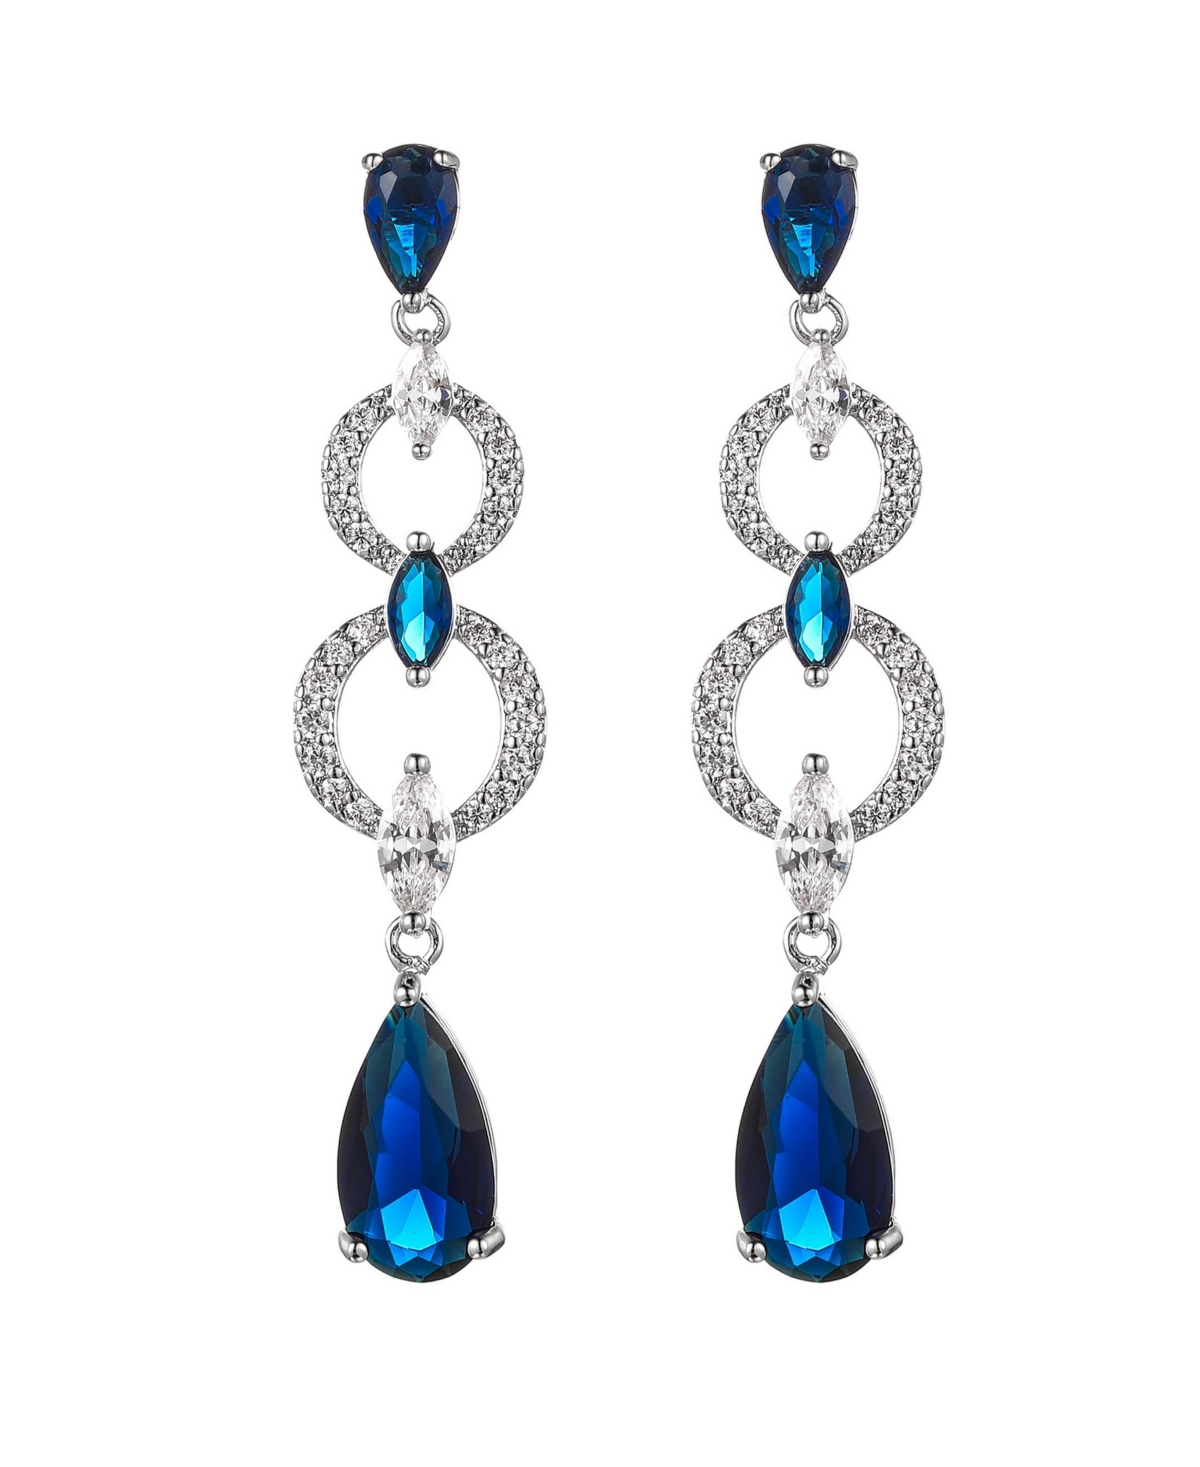 A & M Silver-Tone Sapphire Accent Layered Drop Earrings